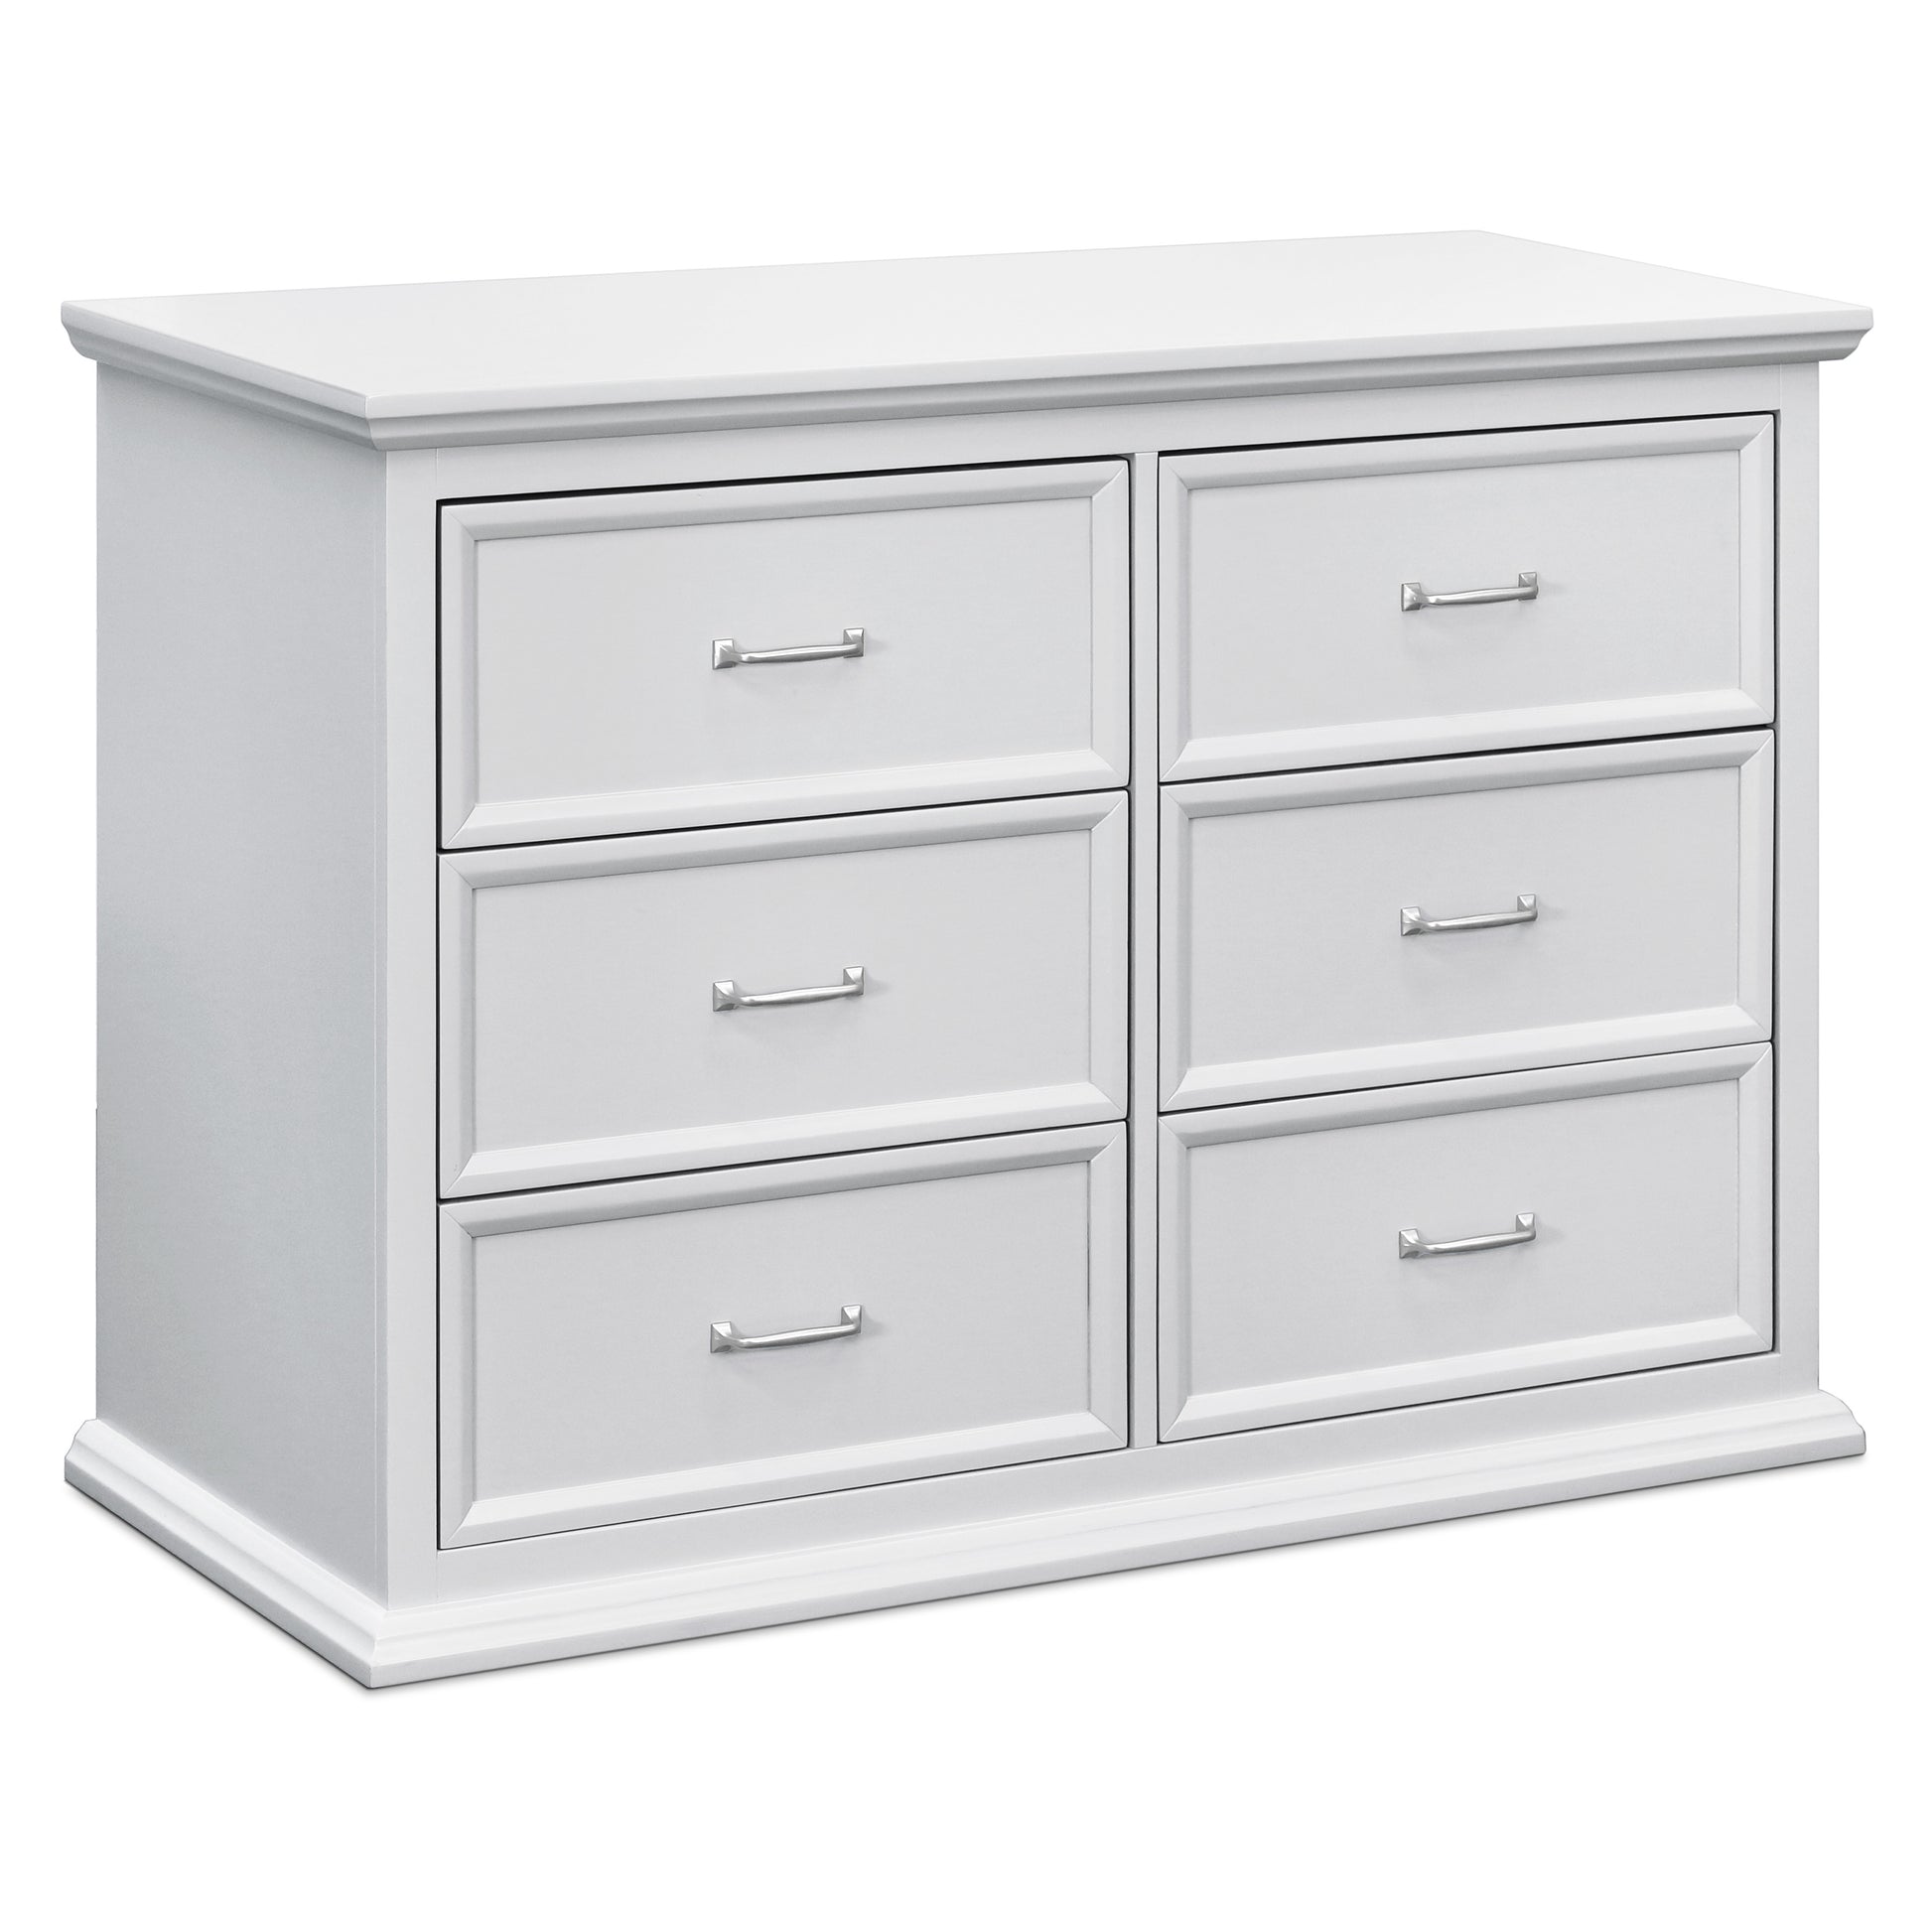 Namesake Foothill-Louis 6-Drawer Dresser | The Baby Cubby